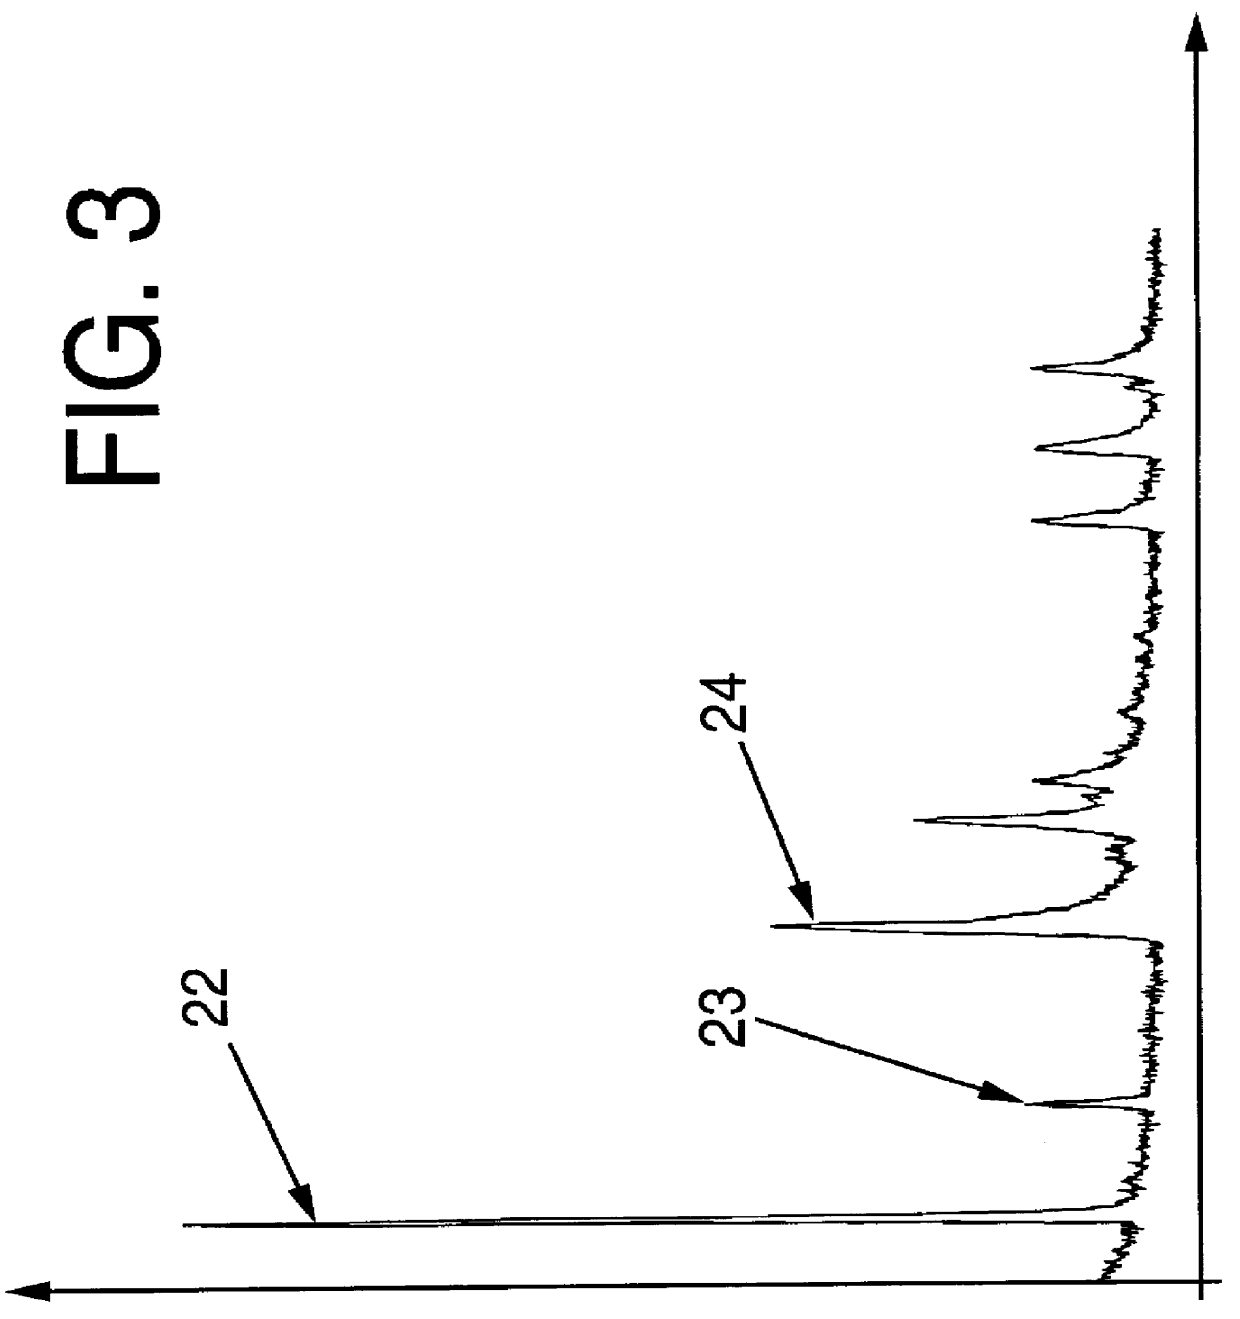 Process for preparing GAMM-hexalactone, products produced therefrom dan organoleptic uses of said products